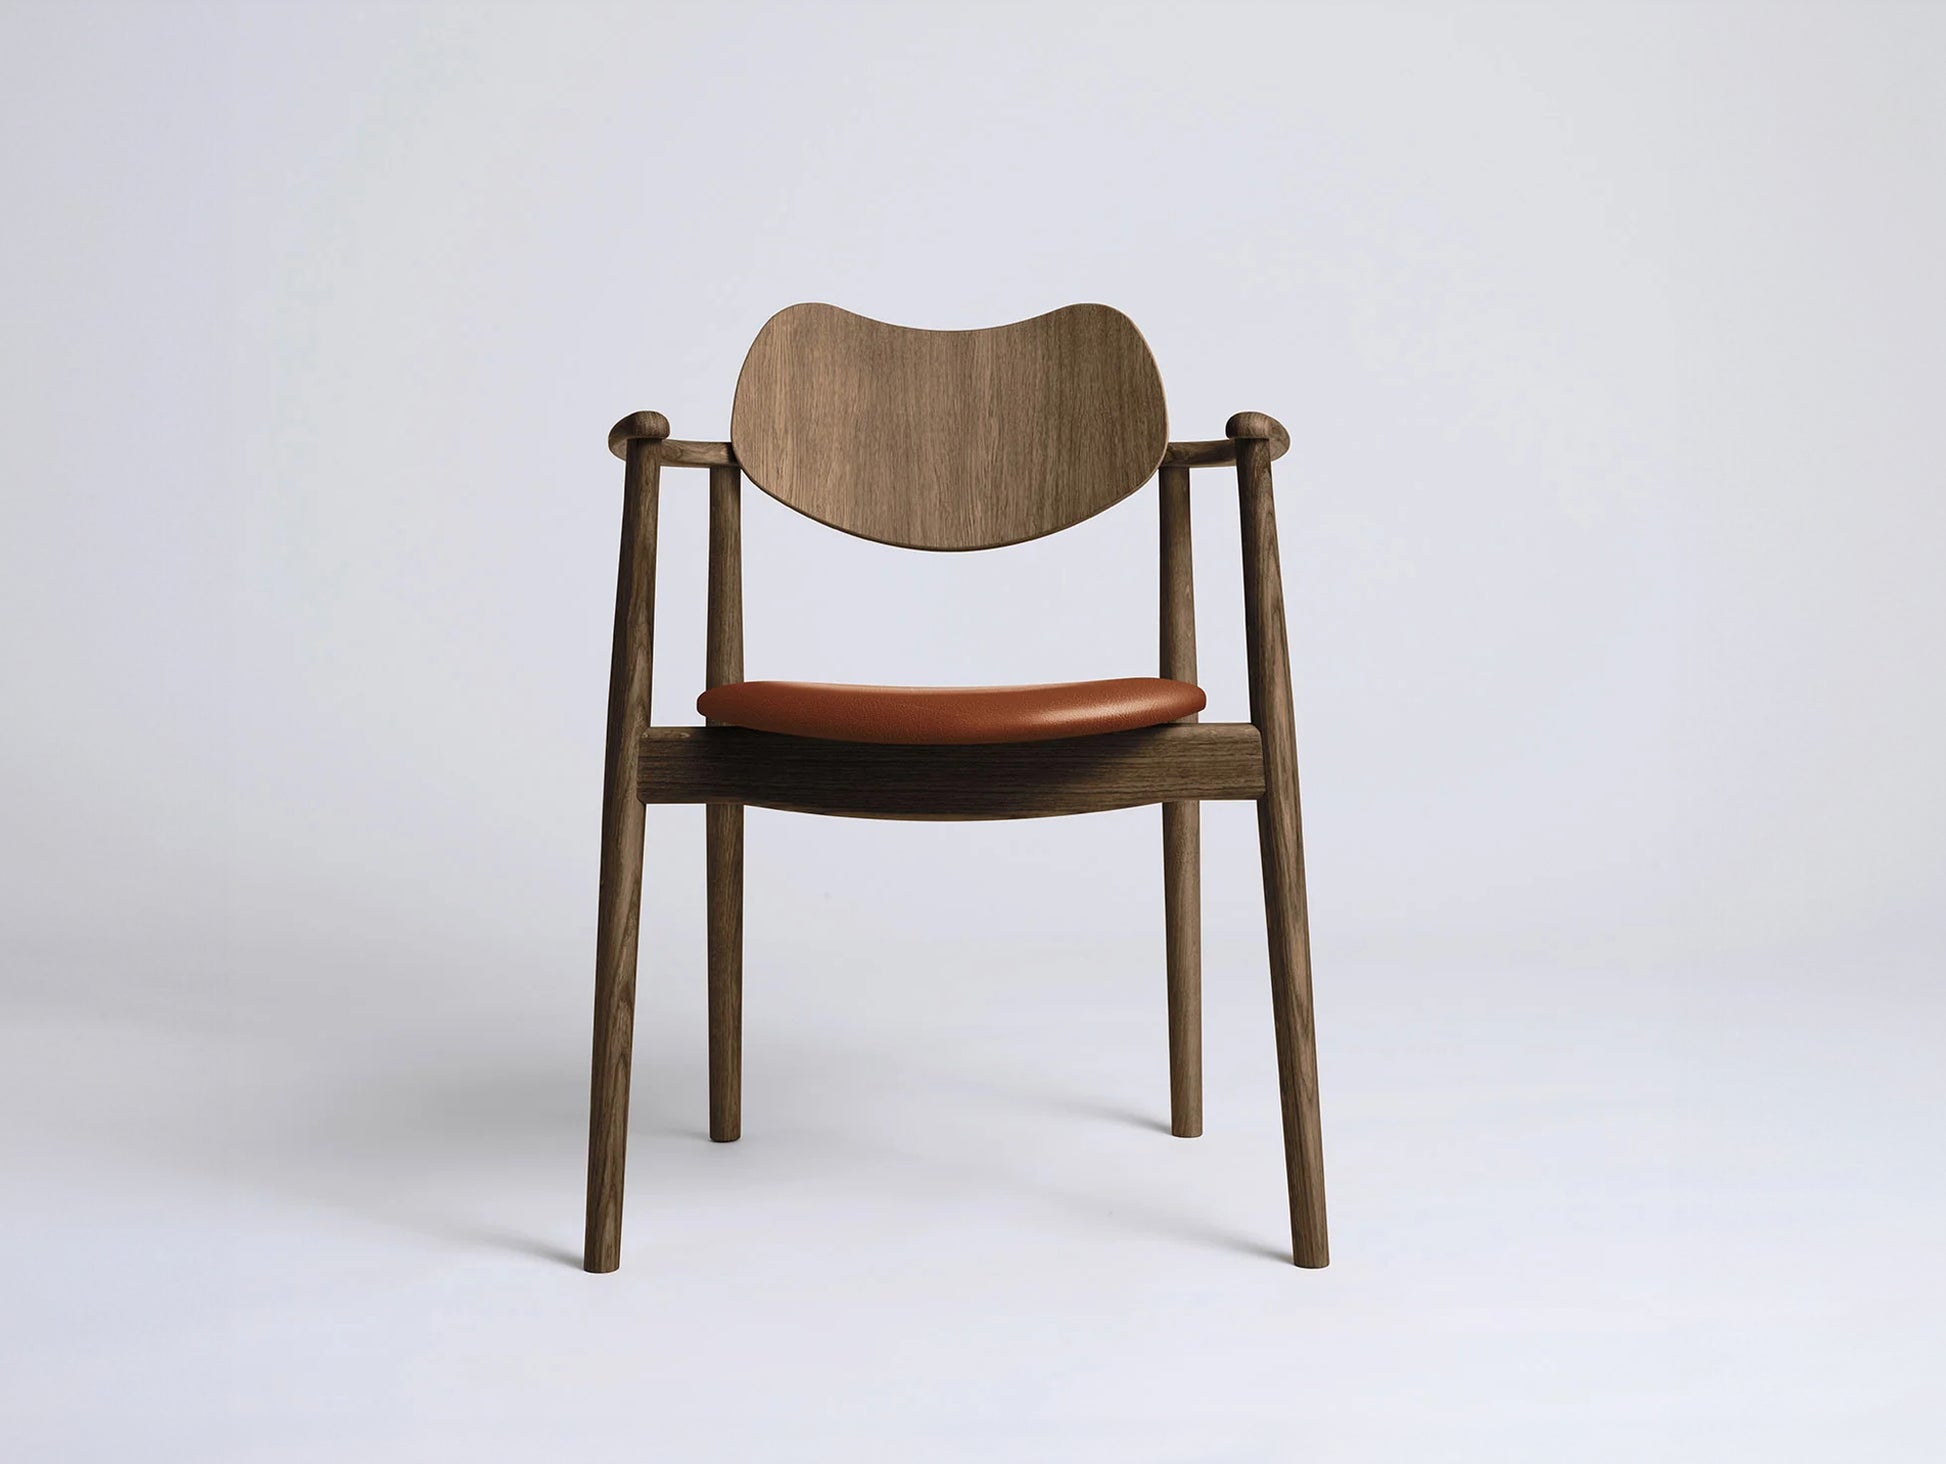 Regatta Chair Seat Upholstered by Ro Collection - Smoked Oak / Exclusive Rio Cognac Leather